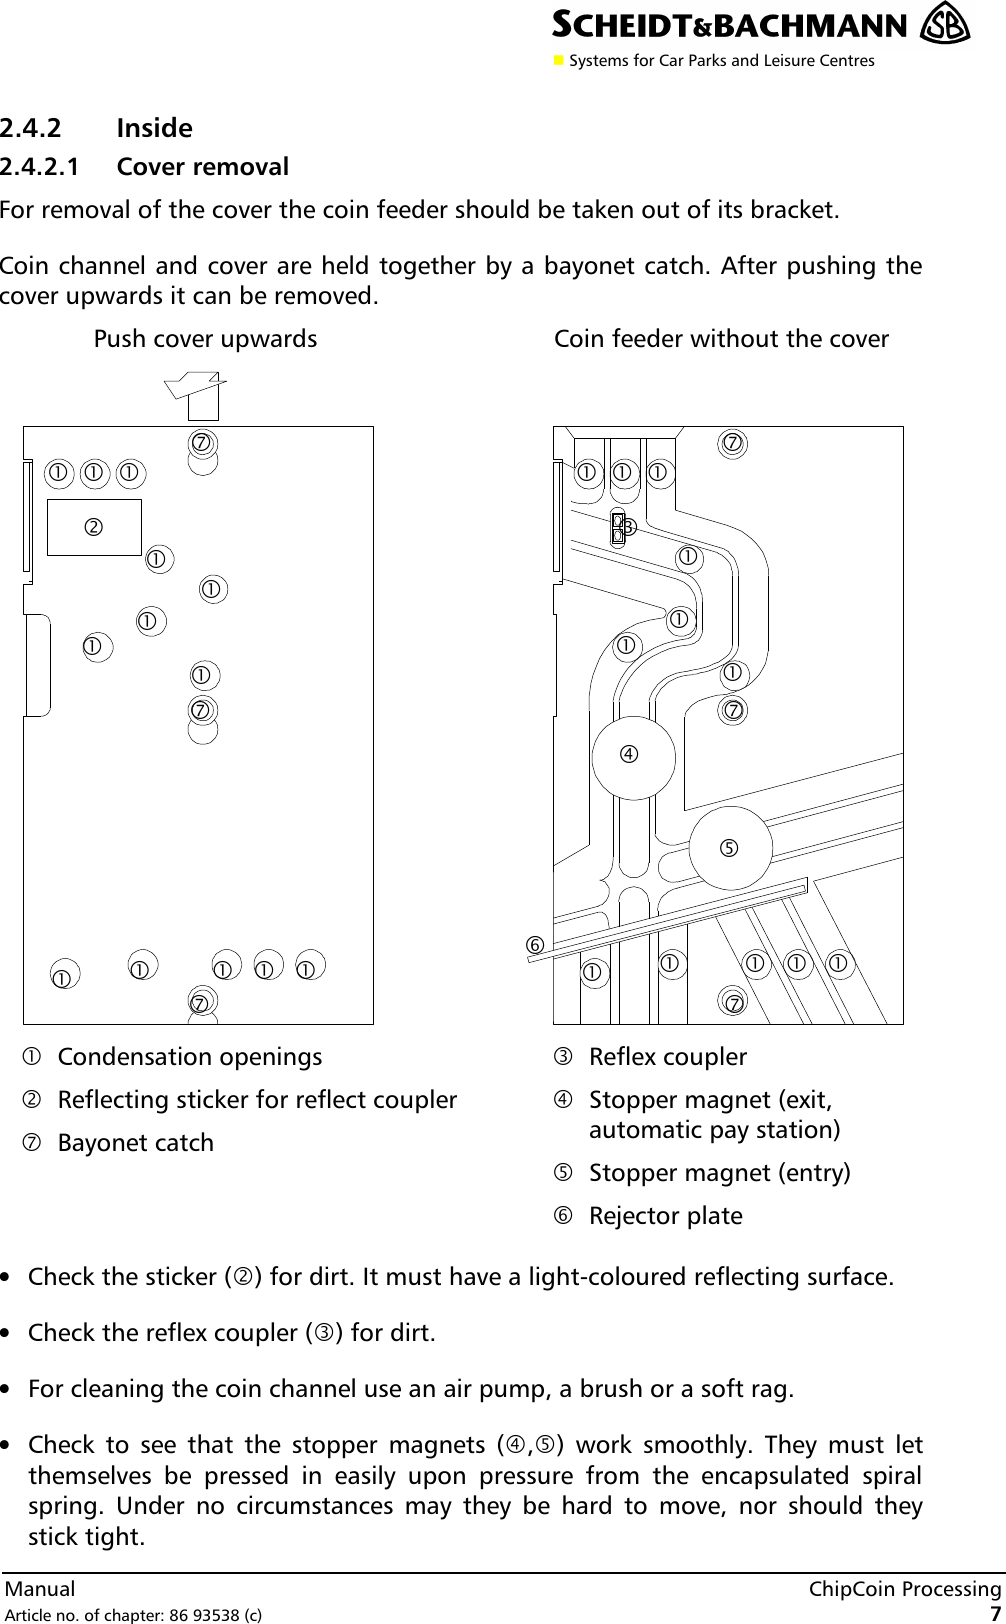 n Systems for Car Parks and Leisure CentresManual ChipCoin ProcessingArticle no. of chapter: 86 93538 (c) 7 2.4.2 Inside 2.4.2.1 Cover removal For removal of the cover the coin feeder should be taken out of its bracket. Coin channel and cover are held together by a bayonet catch. After pushing thecover upwards it can be removed. Push cover upwards Coin feeder without the cover   •Condensation openings ‚Reflecting sticker for reflect coupler ‡Bayonet catch  ƒReflex coupler „Stopper magnet (exit,automatic pay station) … Stopper magnet (entry) †Rejector plate • Check the sticker (‚) for dirt. It must have a light-coloured reflecting surface.• Check the reflex coupler (ƒ) for dirt.• For cleaning the coin channel use an air pump, a brush or a soft rag.• Check to see that the stopper magnets („,…) work smoothly. They must letthemselves be pressed in easily upon pressure from the encapsulated spiralspring. Under no circumstances may they be hard to move, nor should theystick tight. ‡ ‡ ‡ • • • • • ‡ • • • • • ‡ ‡ † • • • • • • • • • • • • „ • • … ƒ ‚ •